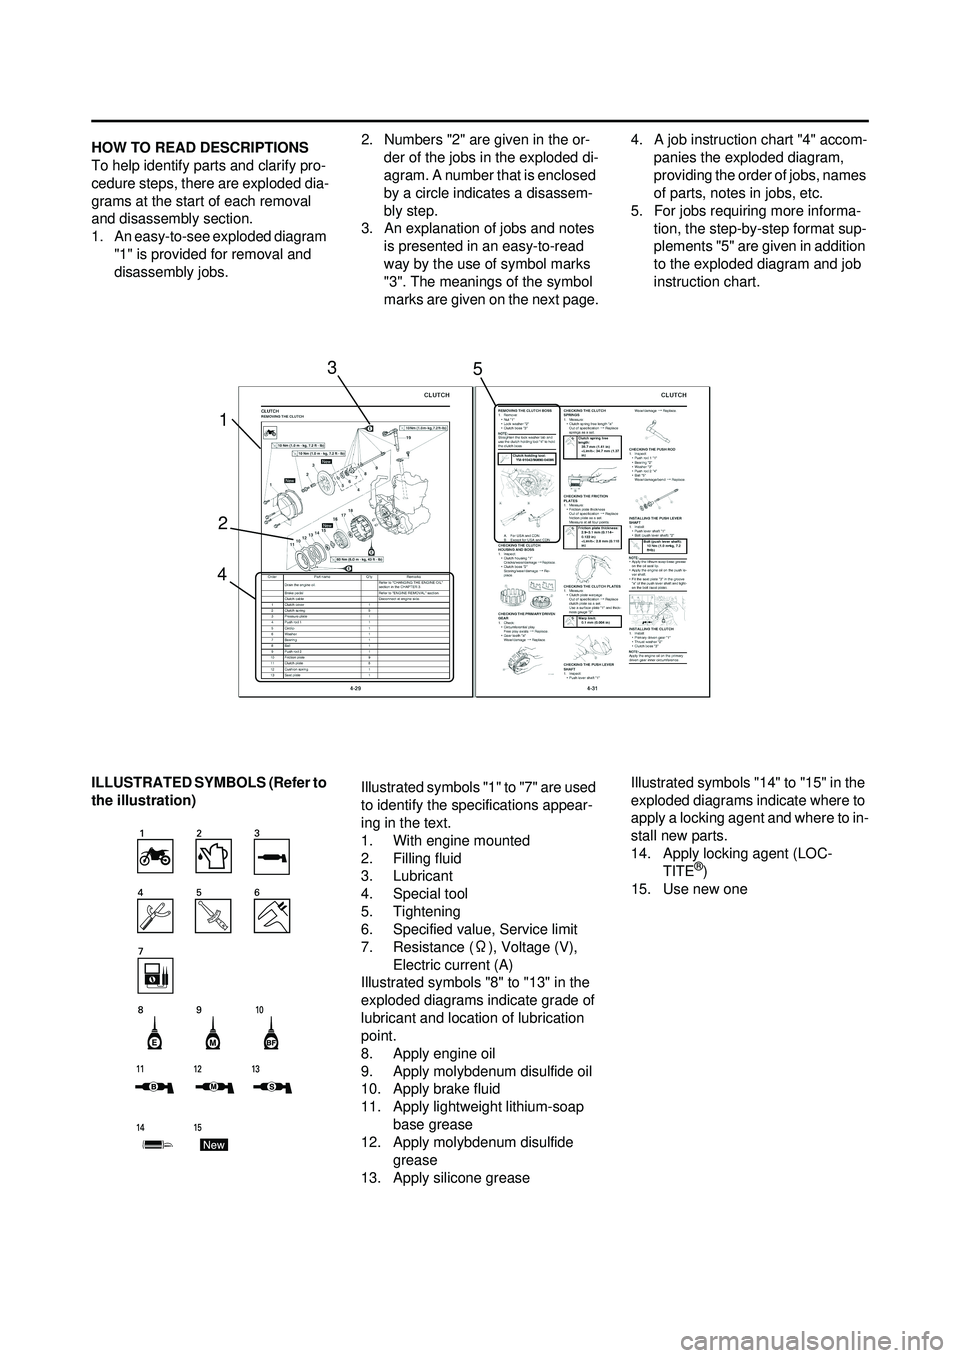 YAMAHA WR 250F 2010  Owners Manual HOW TO READ DESCRIPTIONS
To help identify parts and clarify pro-
cedure steps, there are exploded dia-
grams at the start of each removal 
and disassembly section.
1. An easy-to-see exploded diagram "